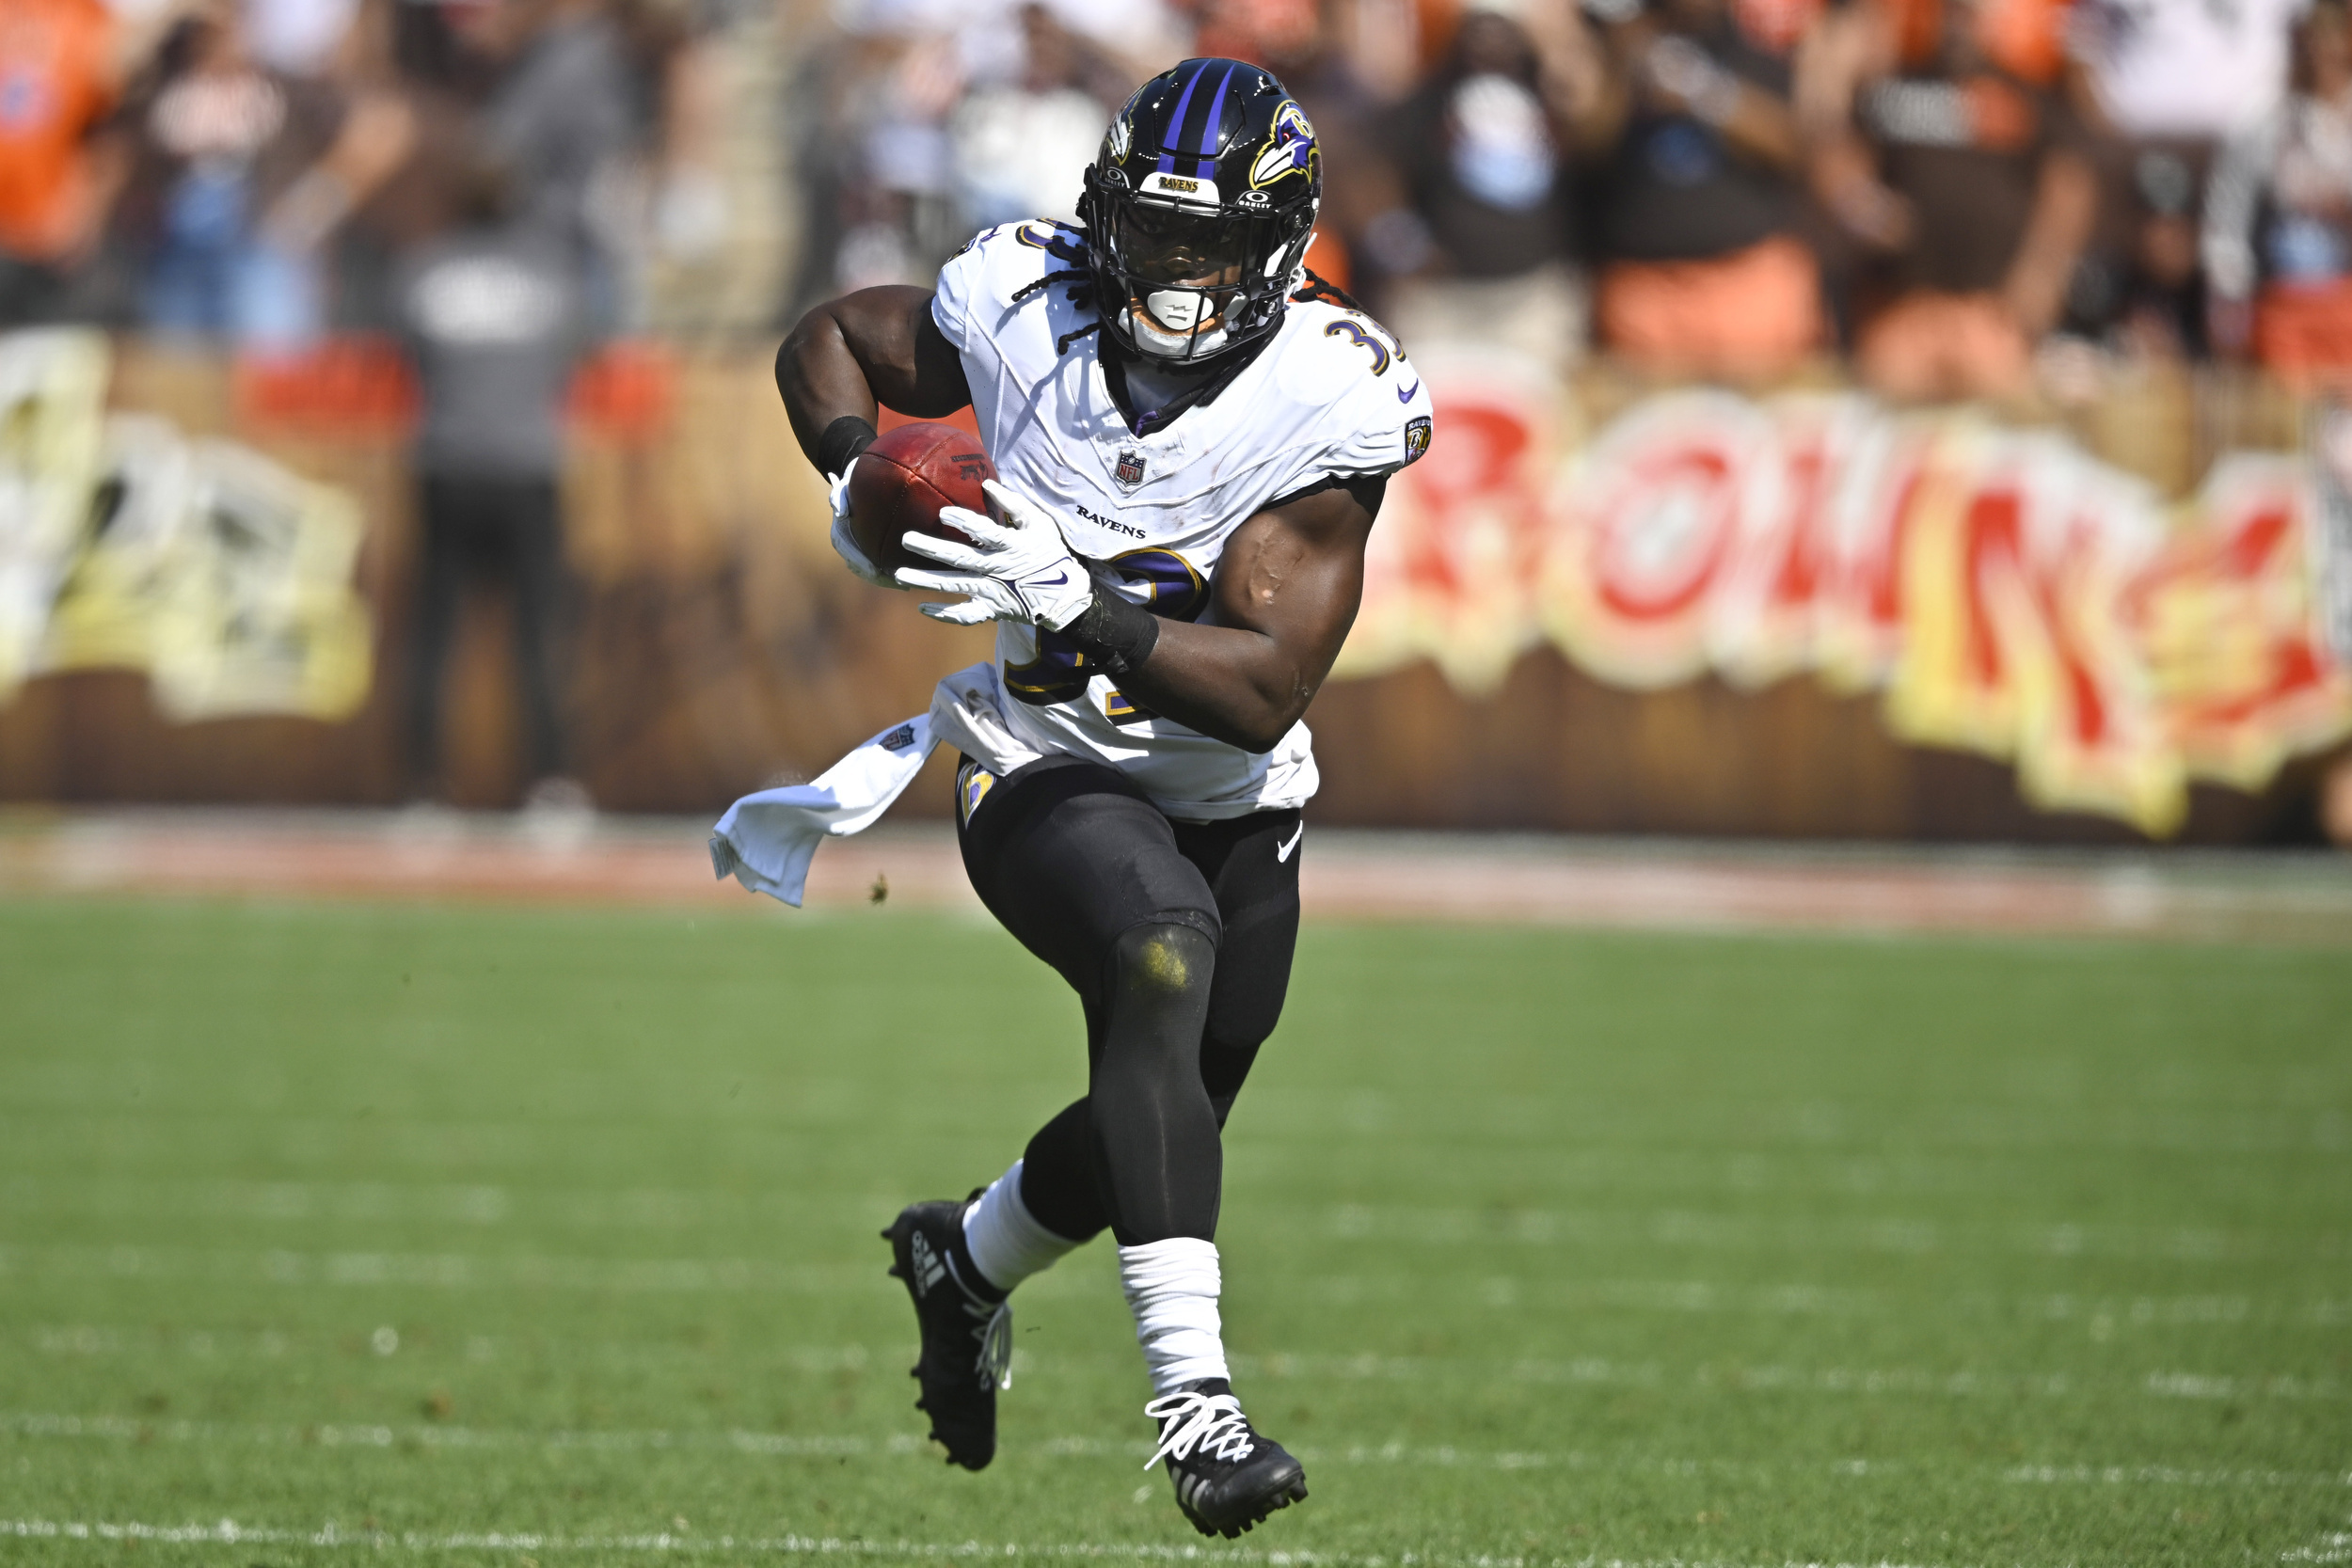 baltimore ravens sign two-time pro bowl, super bowl-winning offensive weapon after losing rb